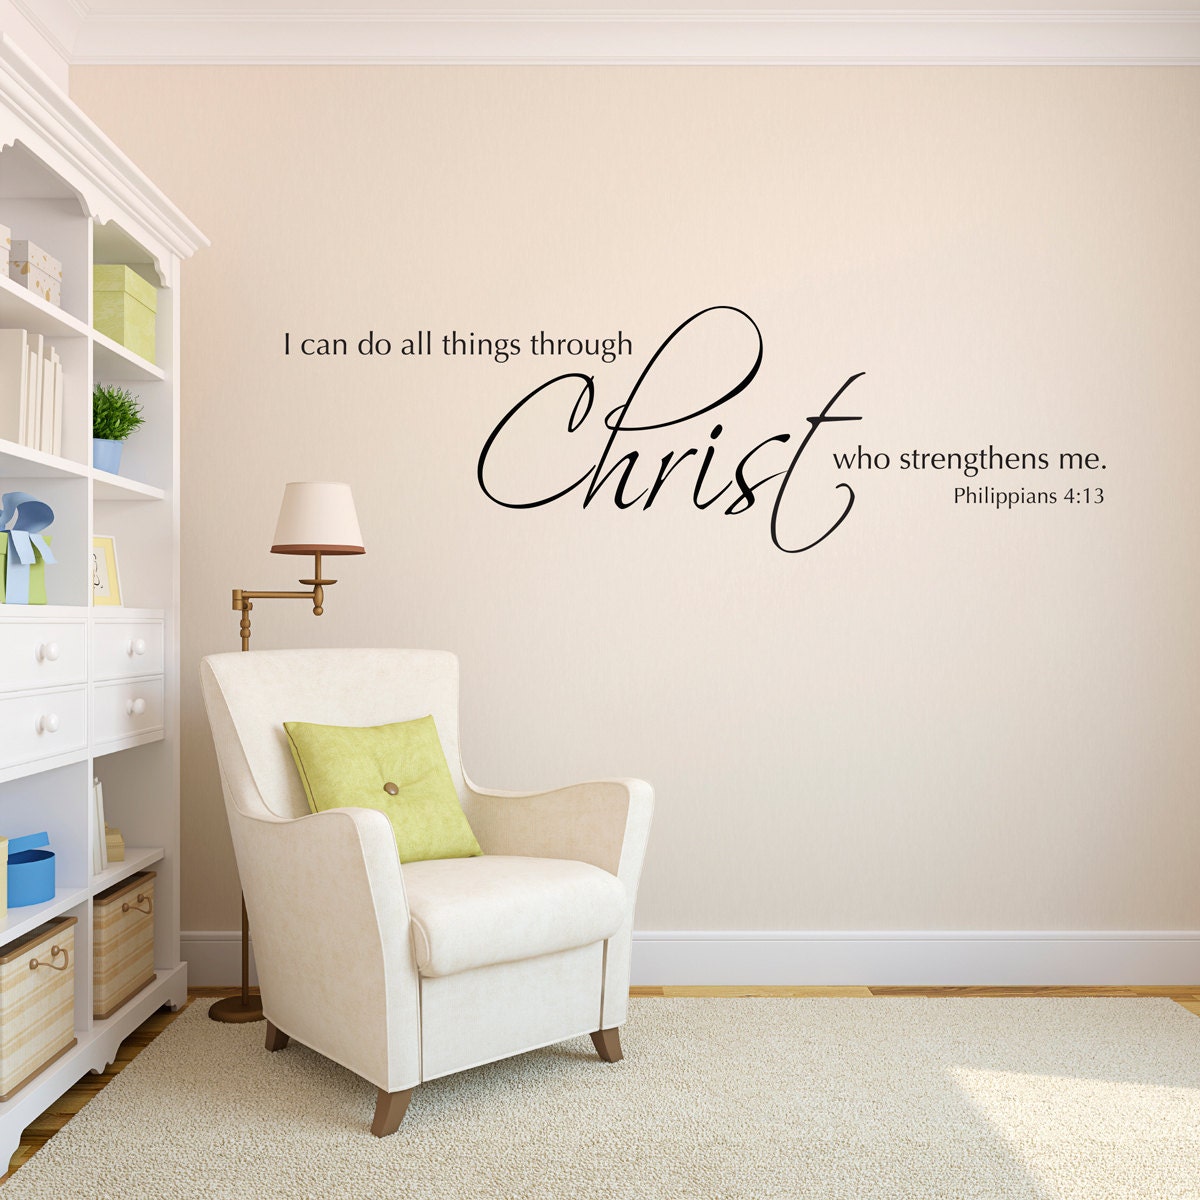 I can do all things through Christ who strengthens me Decal - Christian Bible Verse Decor - Wall Sticker